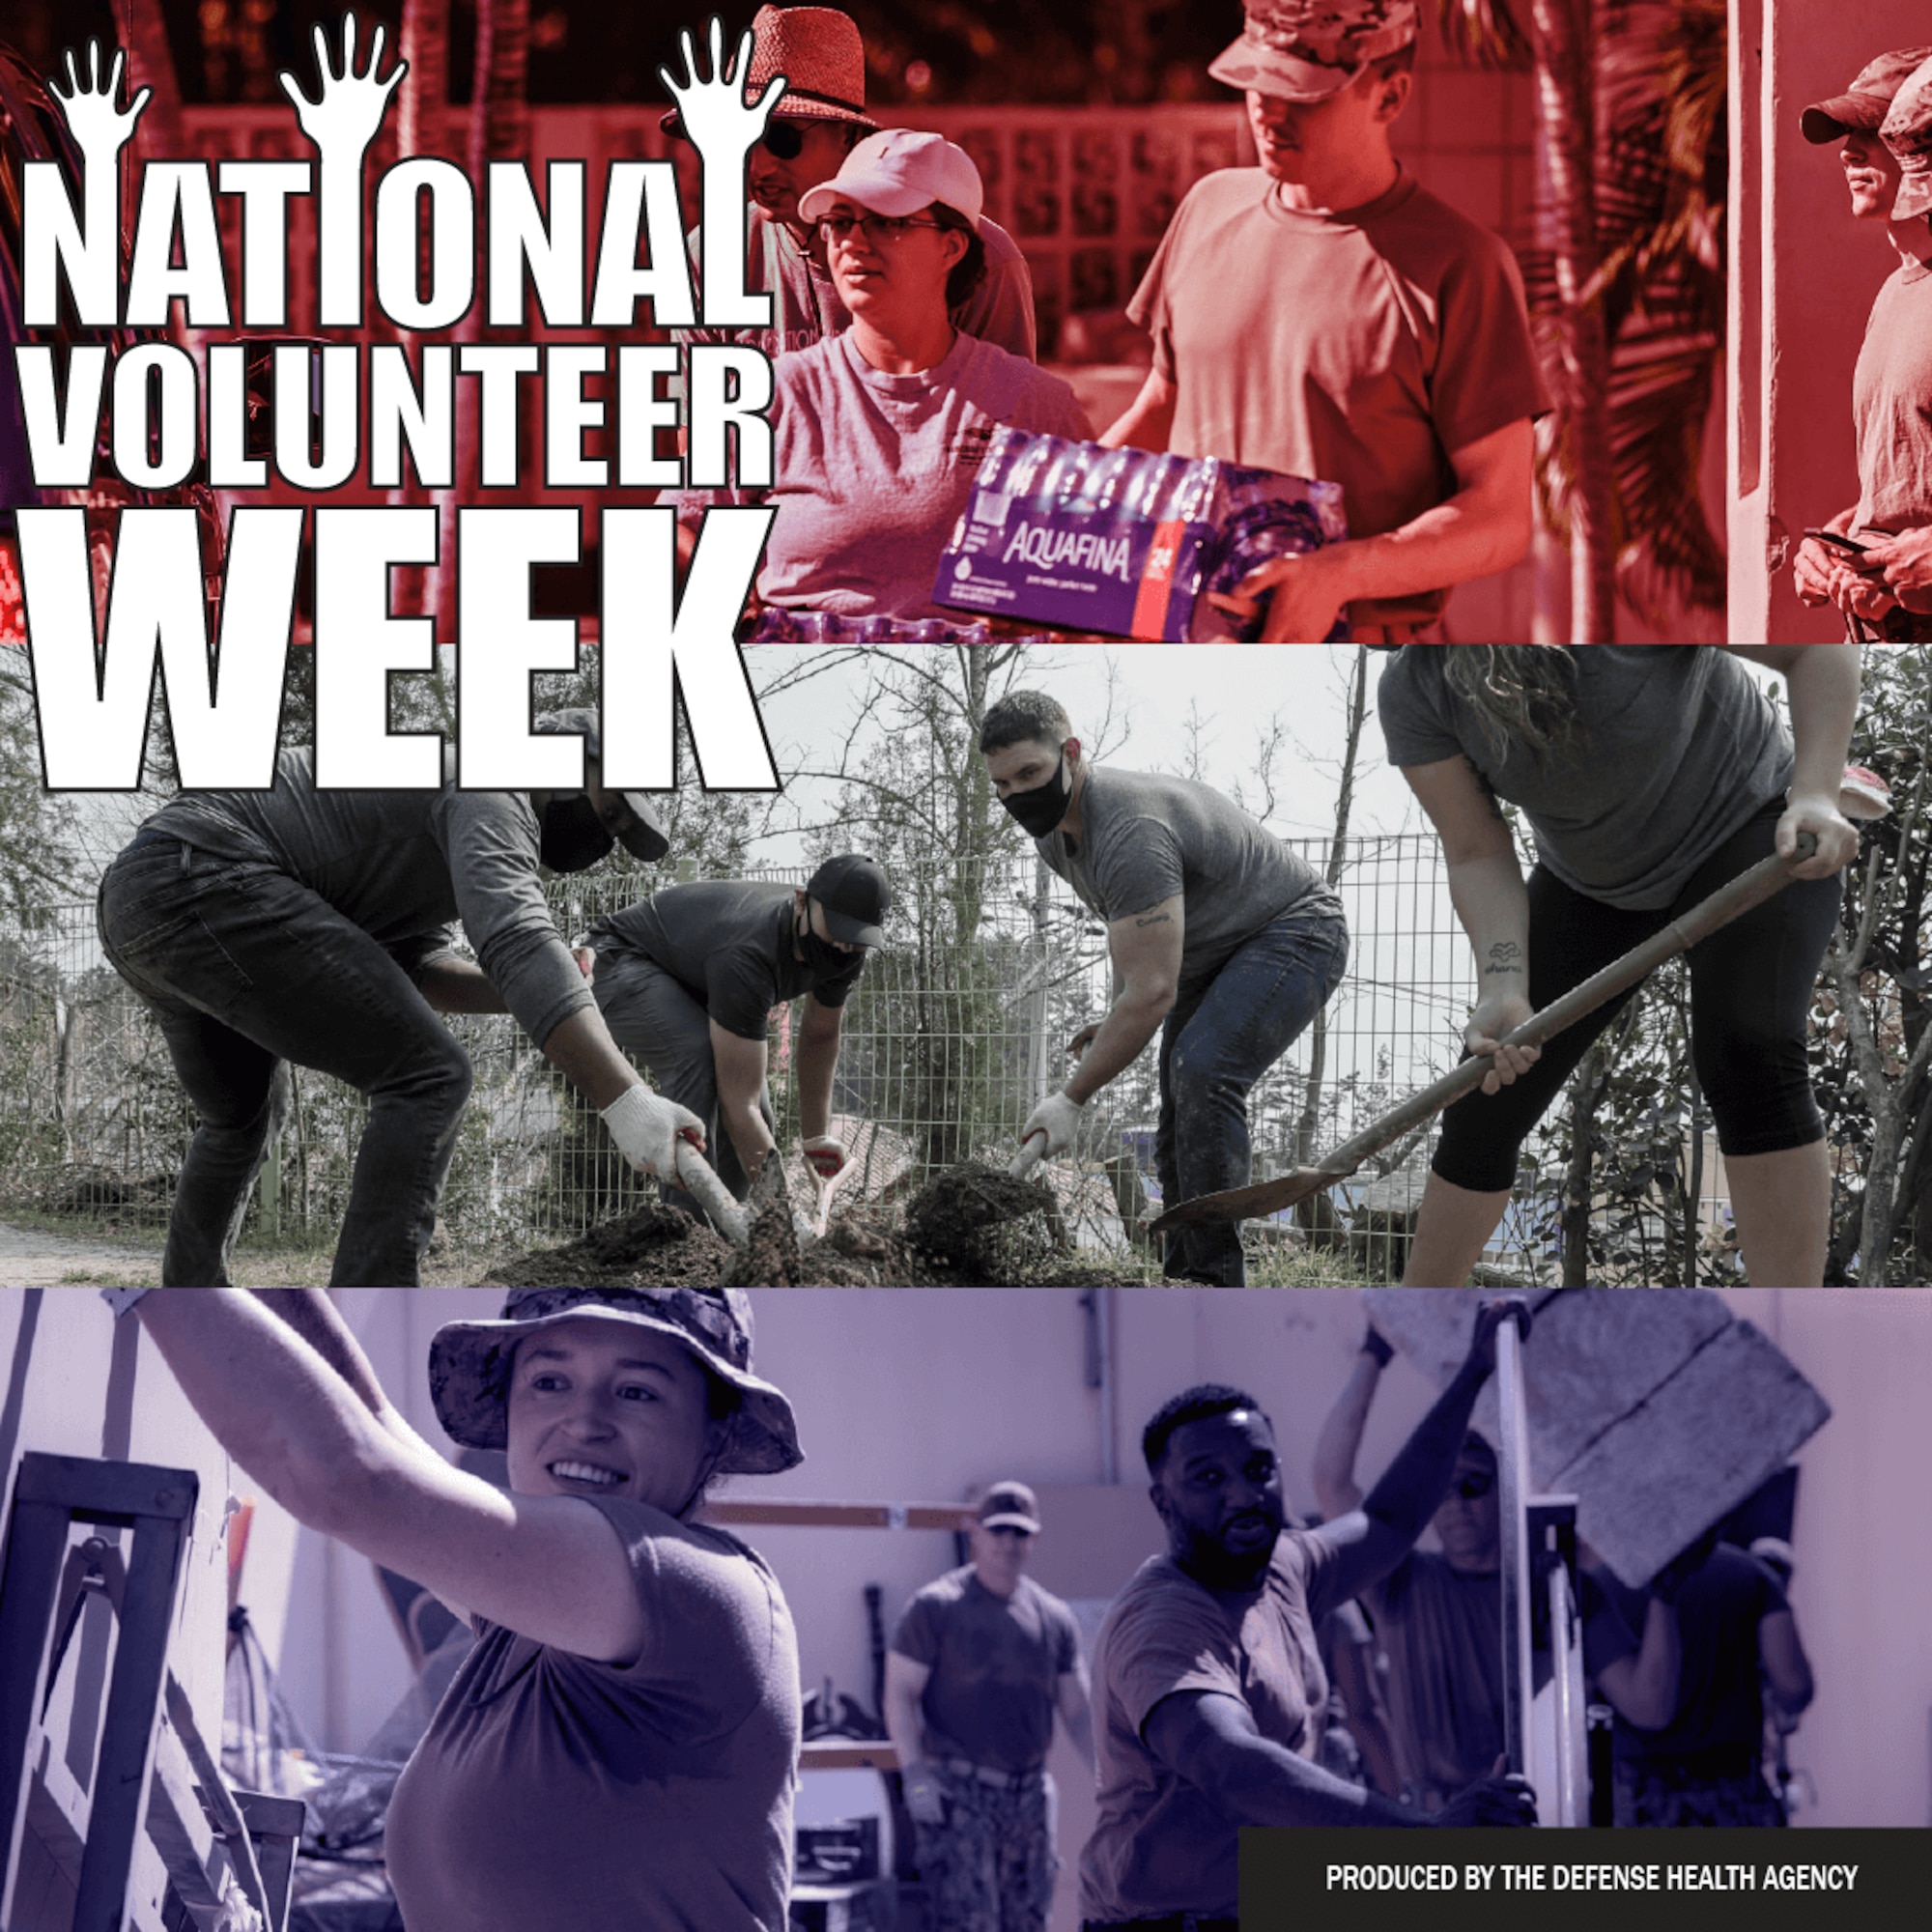 It’s National Volunteer Week! MacDill’s volunteers not only give back to our base but they directly support our mission, our people and our community. Their ongoing support helps highlight how MacDill is a true community of people. Challenge yourself to find a cause you’re passionate about and get out there and make a difference – you’ll be glad you did! (Defense Health Agency graphic)